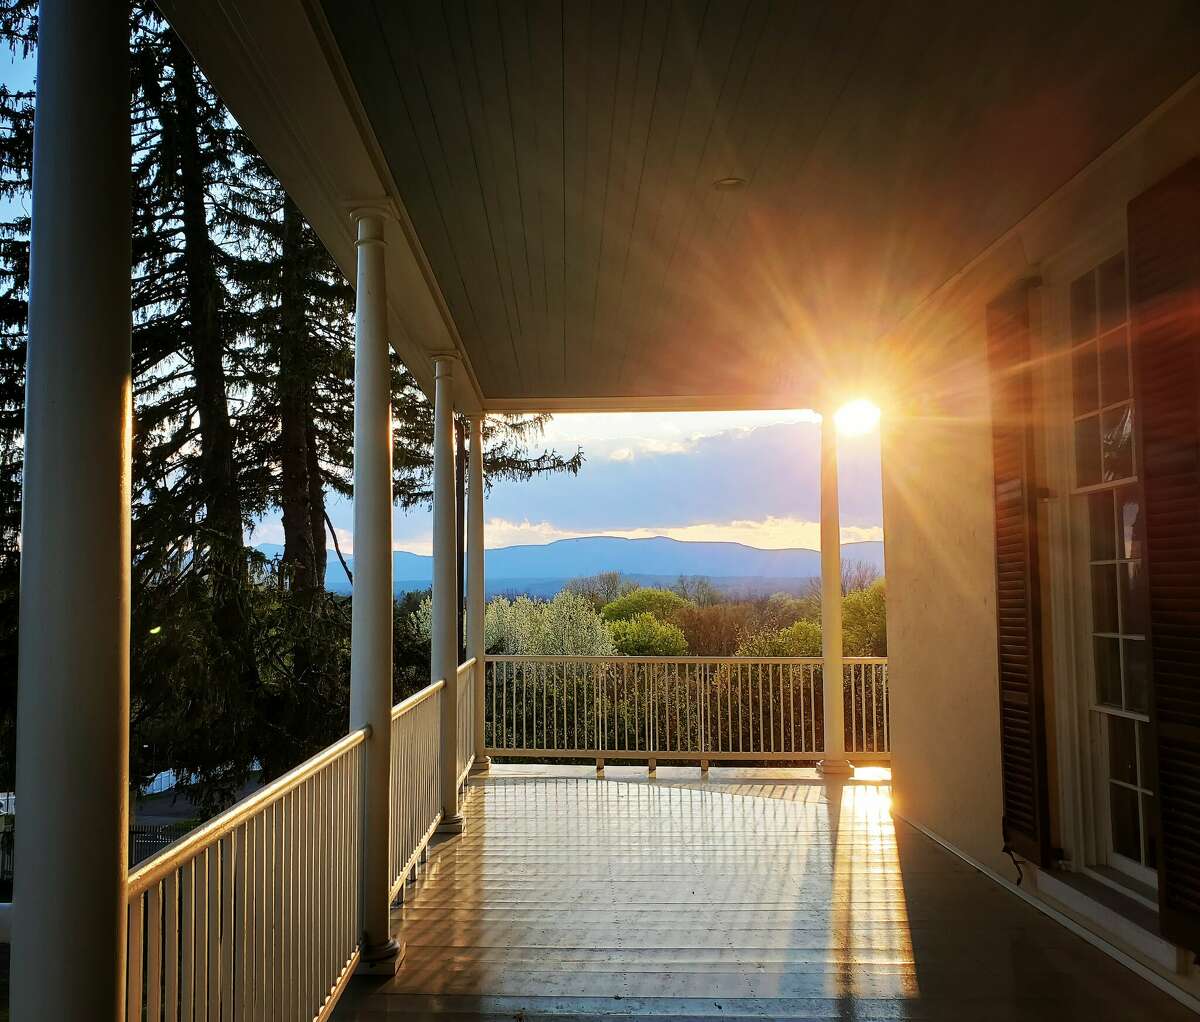 The porch at the Thomas Cole Historic Site in Catskill, with views of the Catskill Mountains. The natural world inspired landscape painter Thomas Cole.